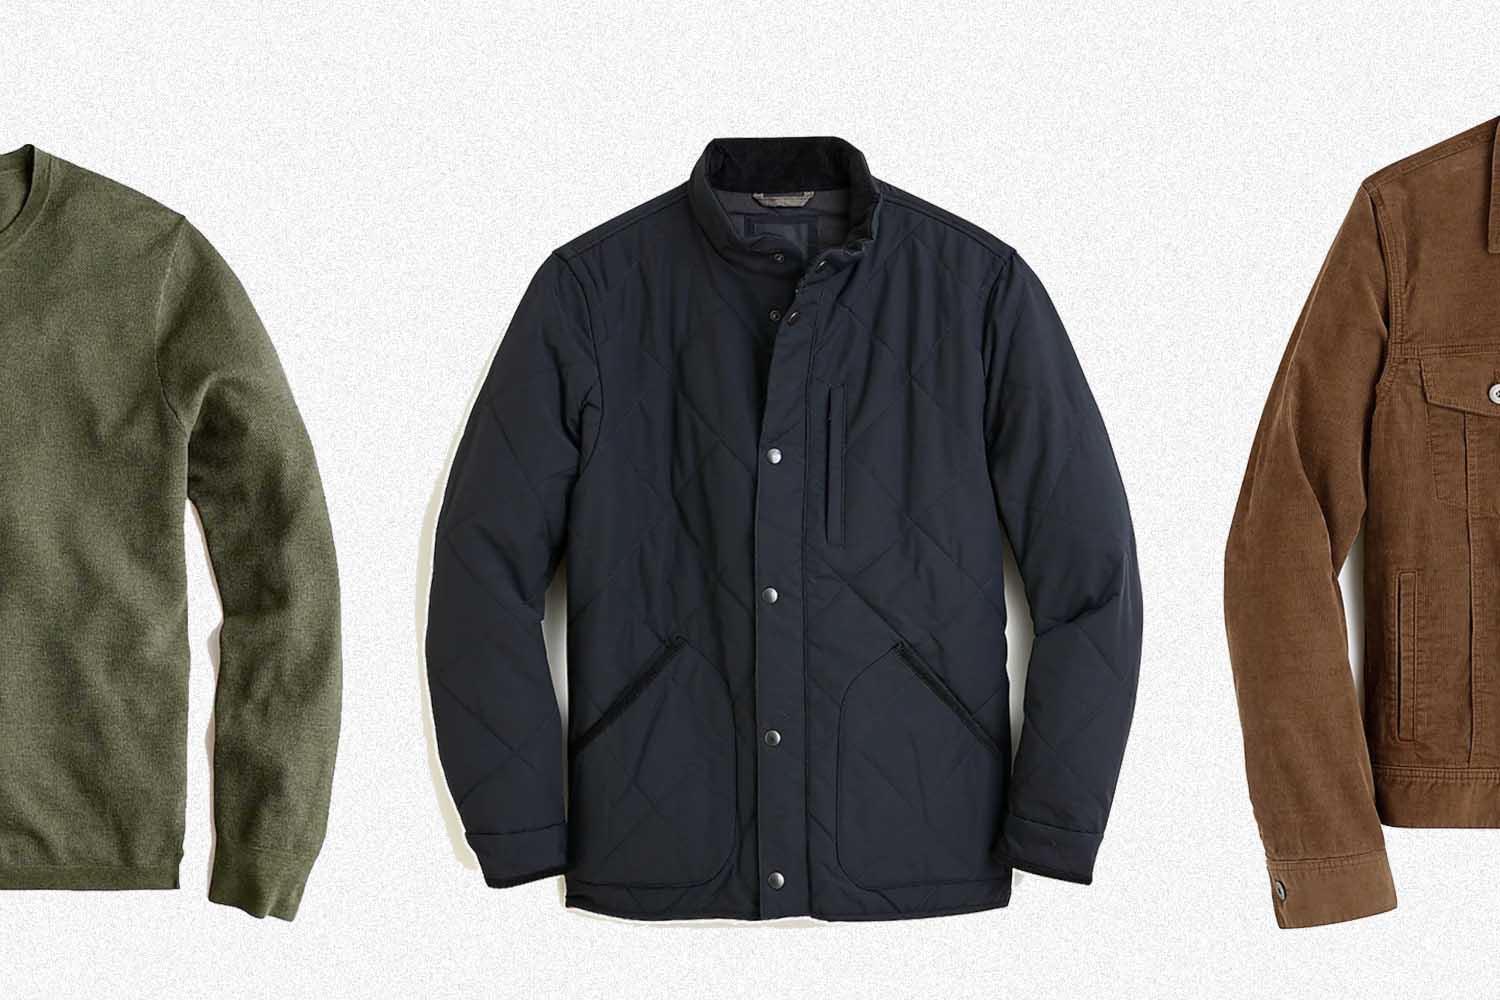 Deal: Fall Outerwear Is Heavily Discounted at J.Crew Right Now